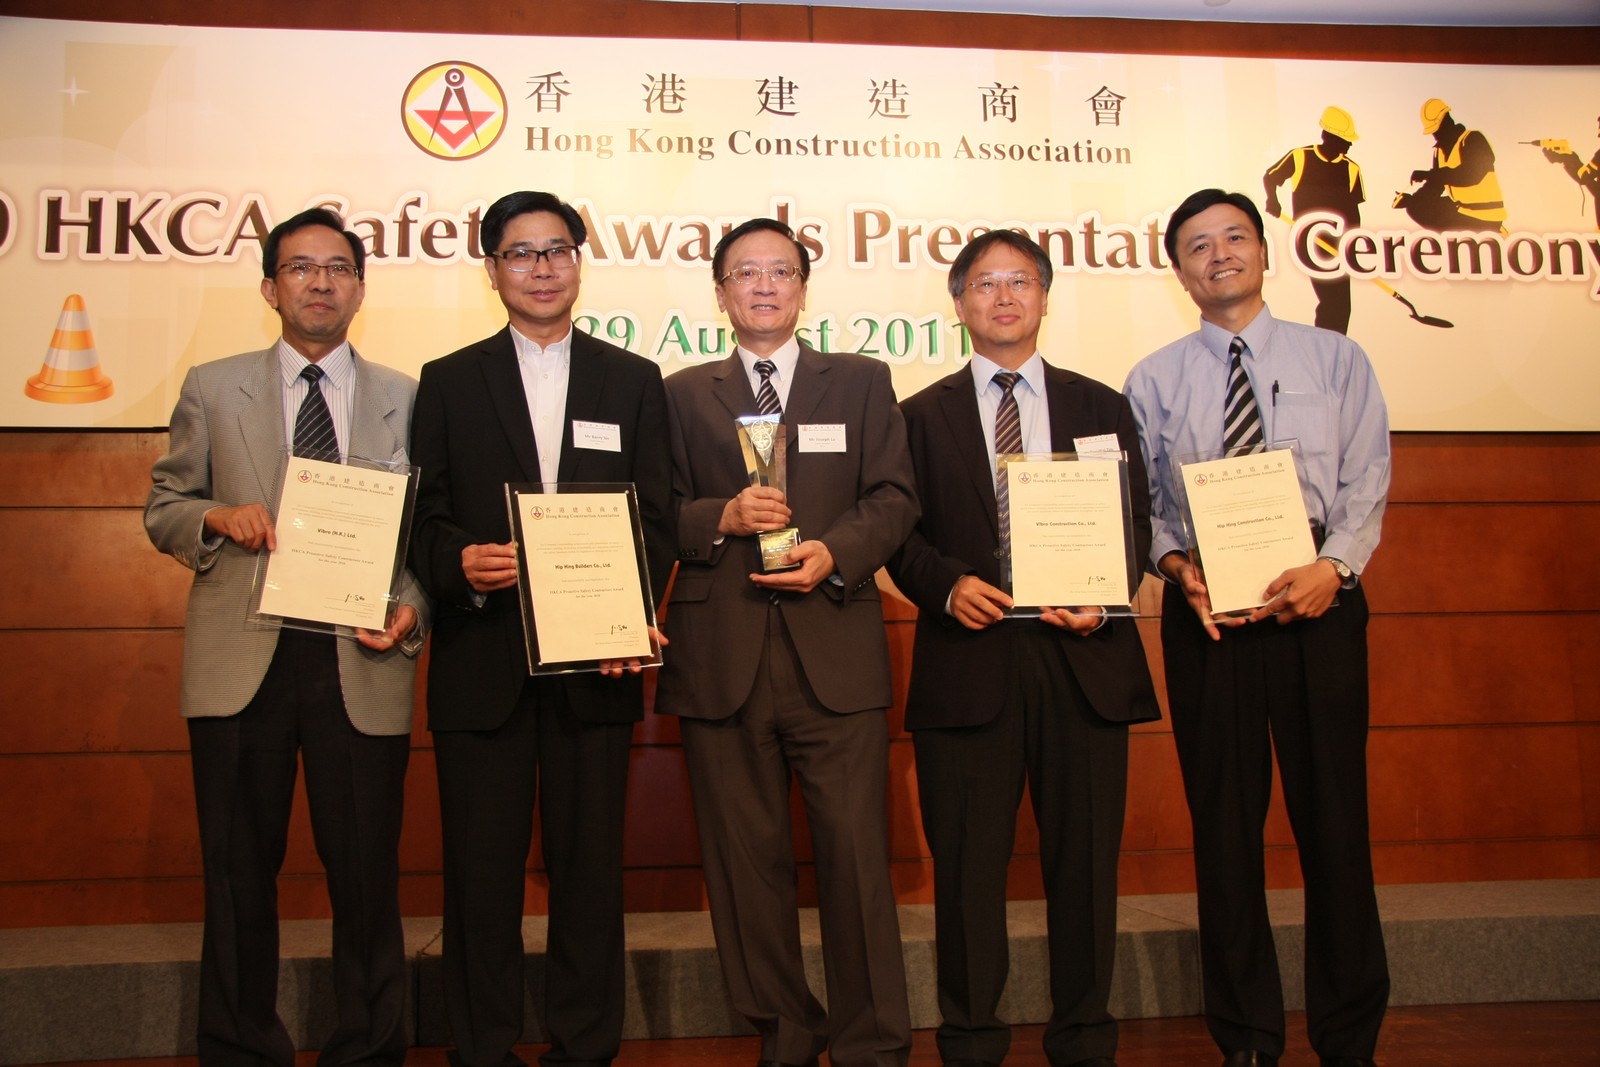 Hip Hing and Vibro Management receives the awards on behalf of the companies